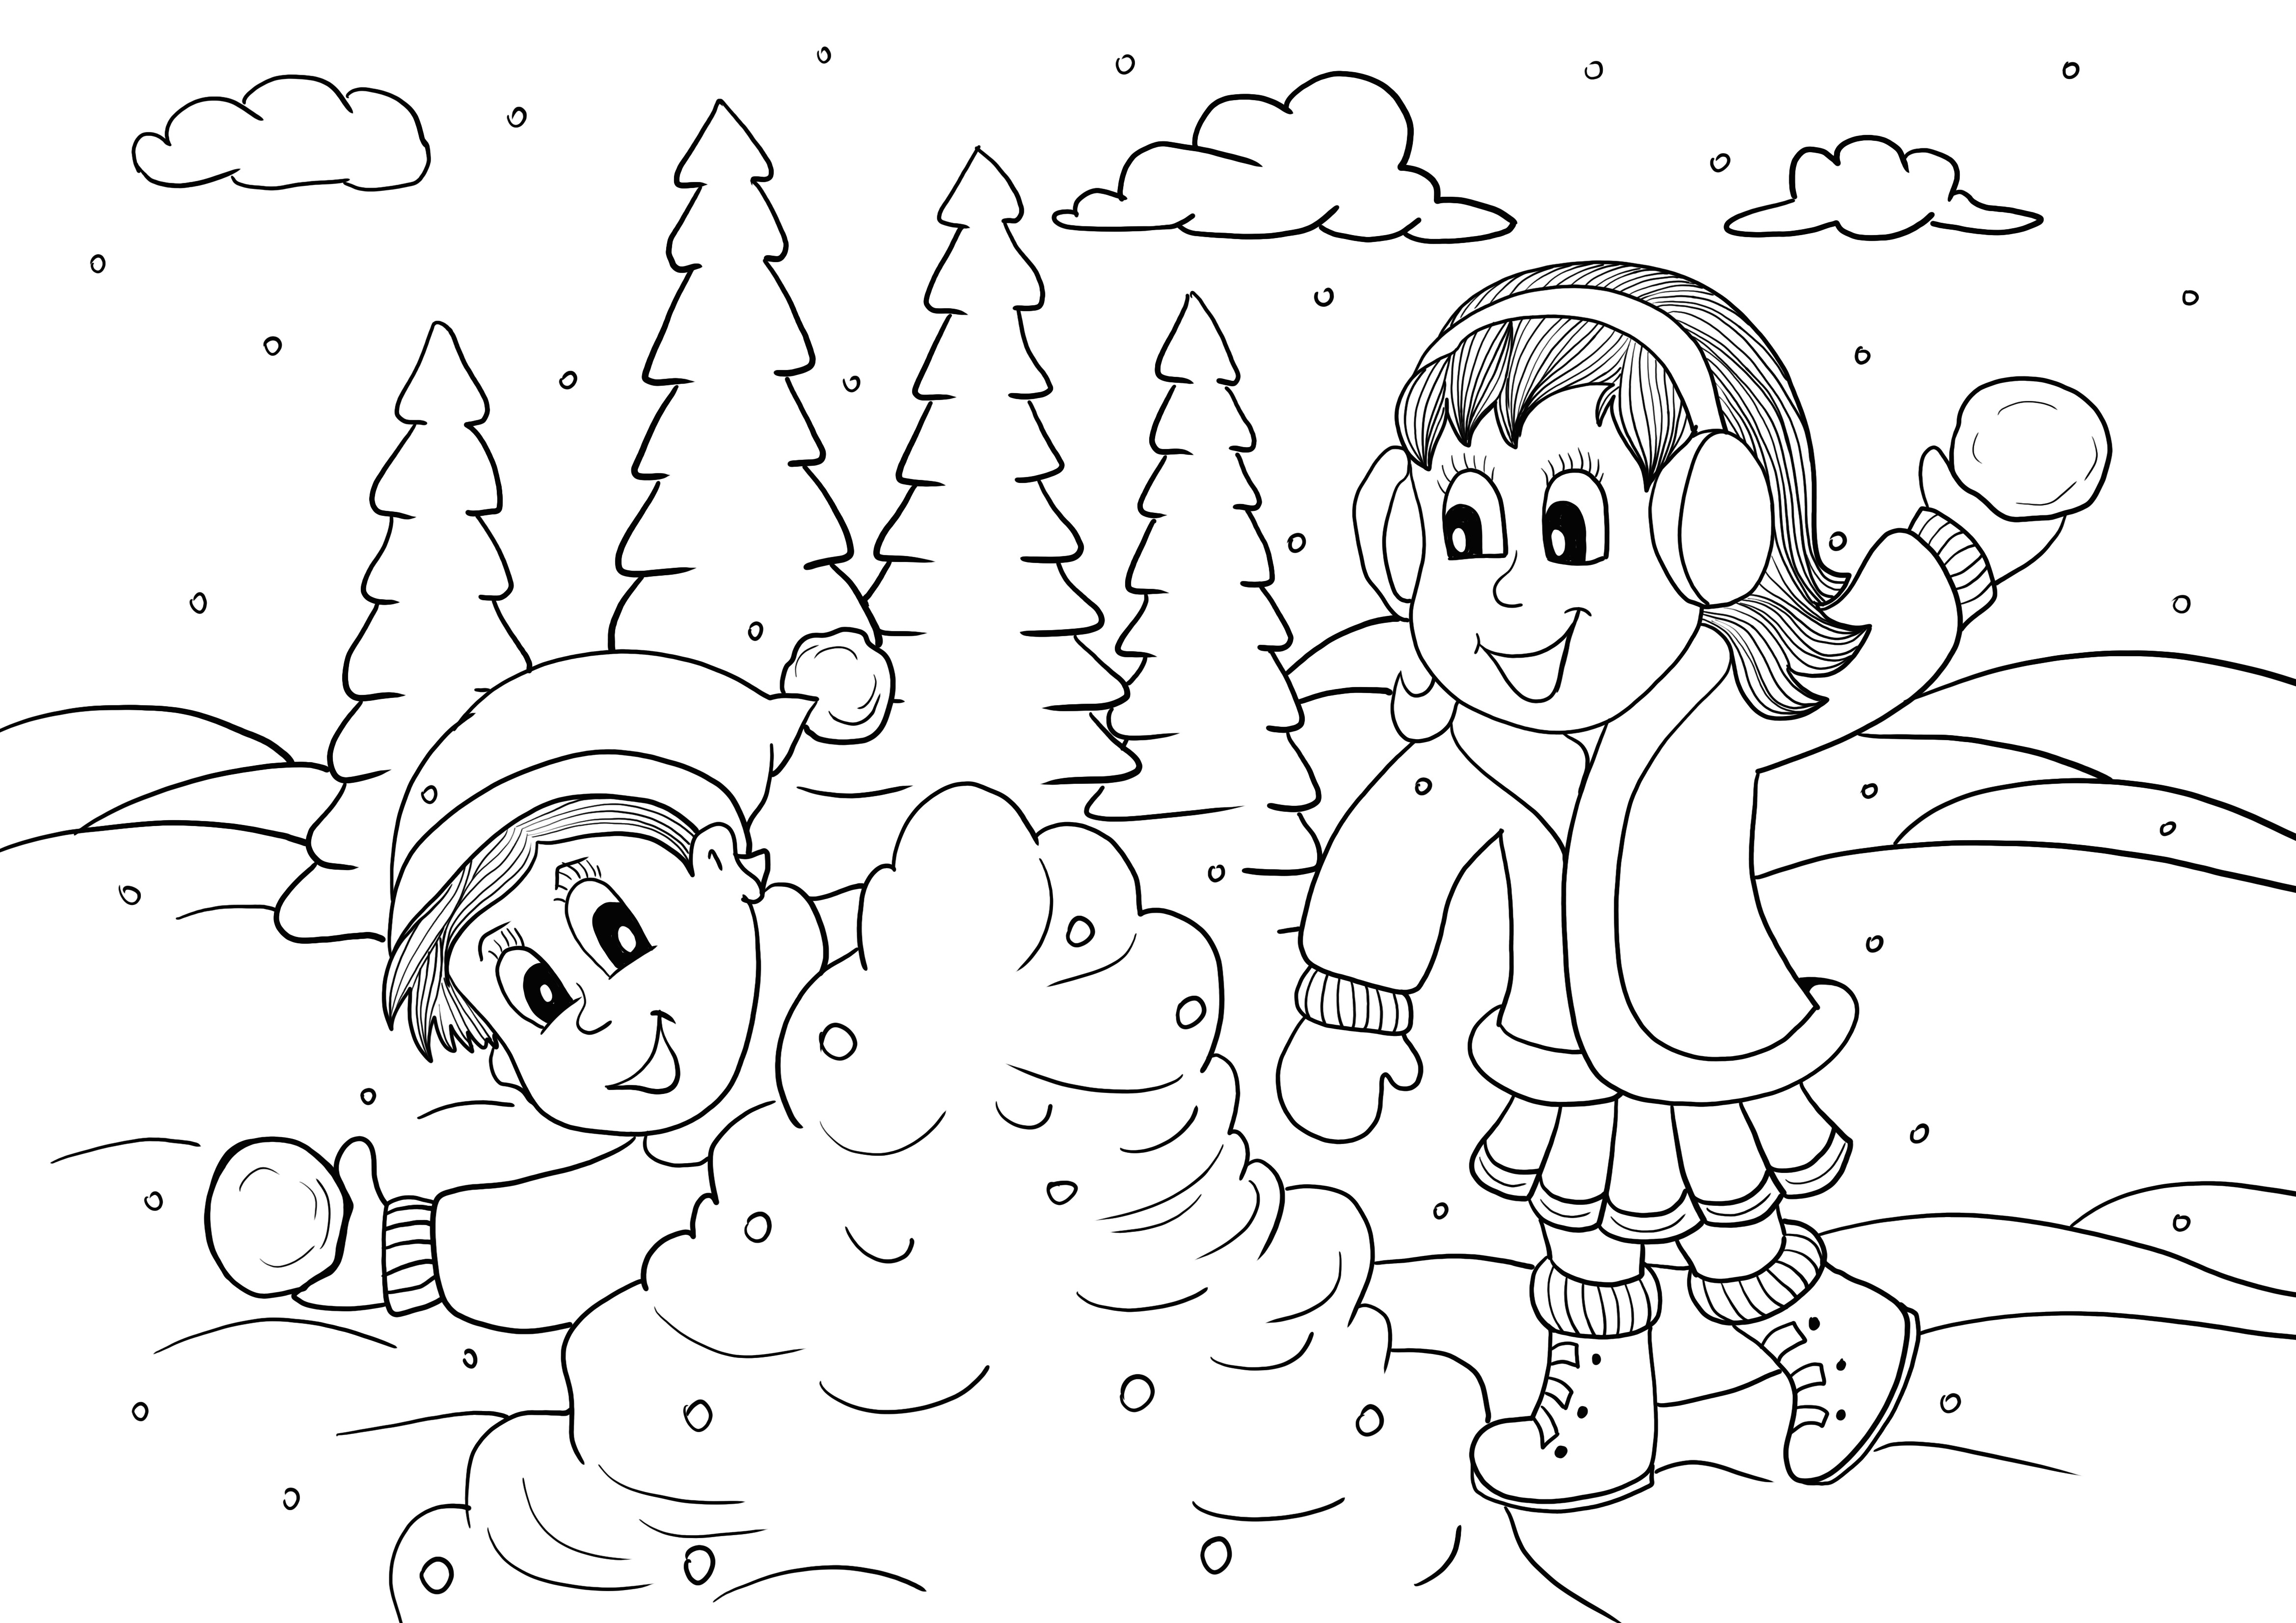 children and snowballs playing coloring sheet and free printables